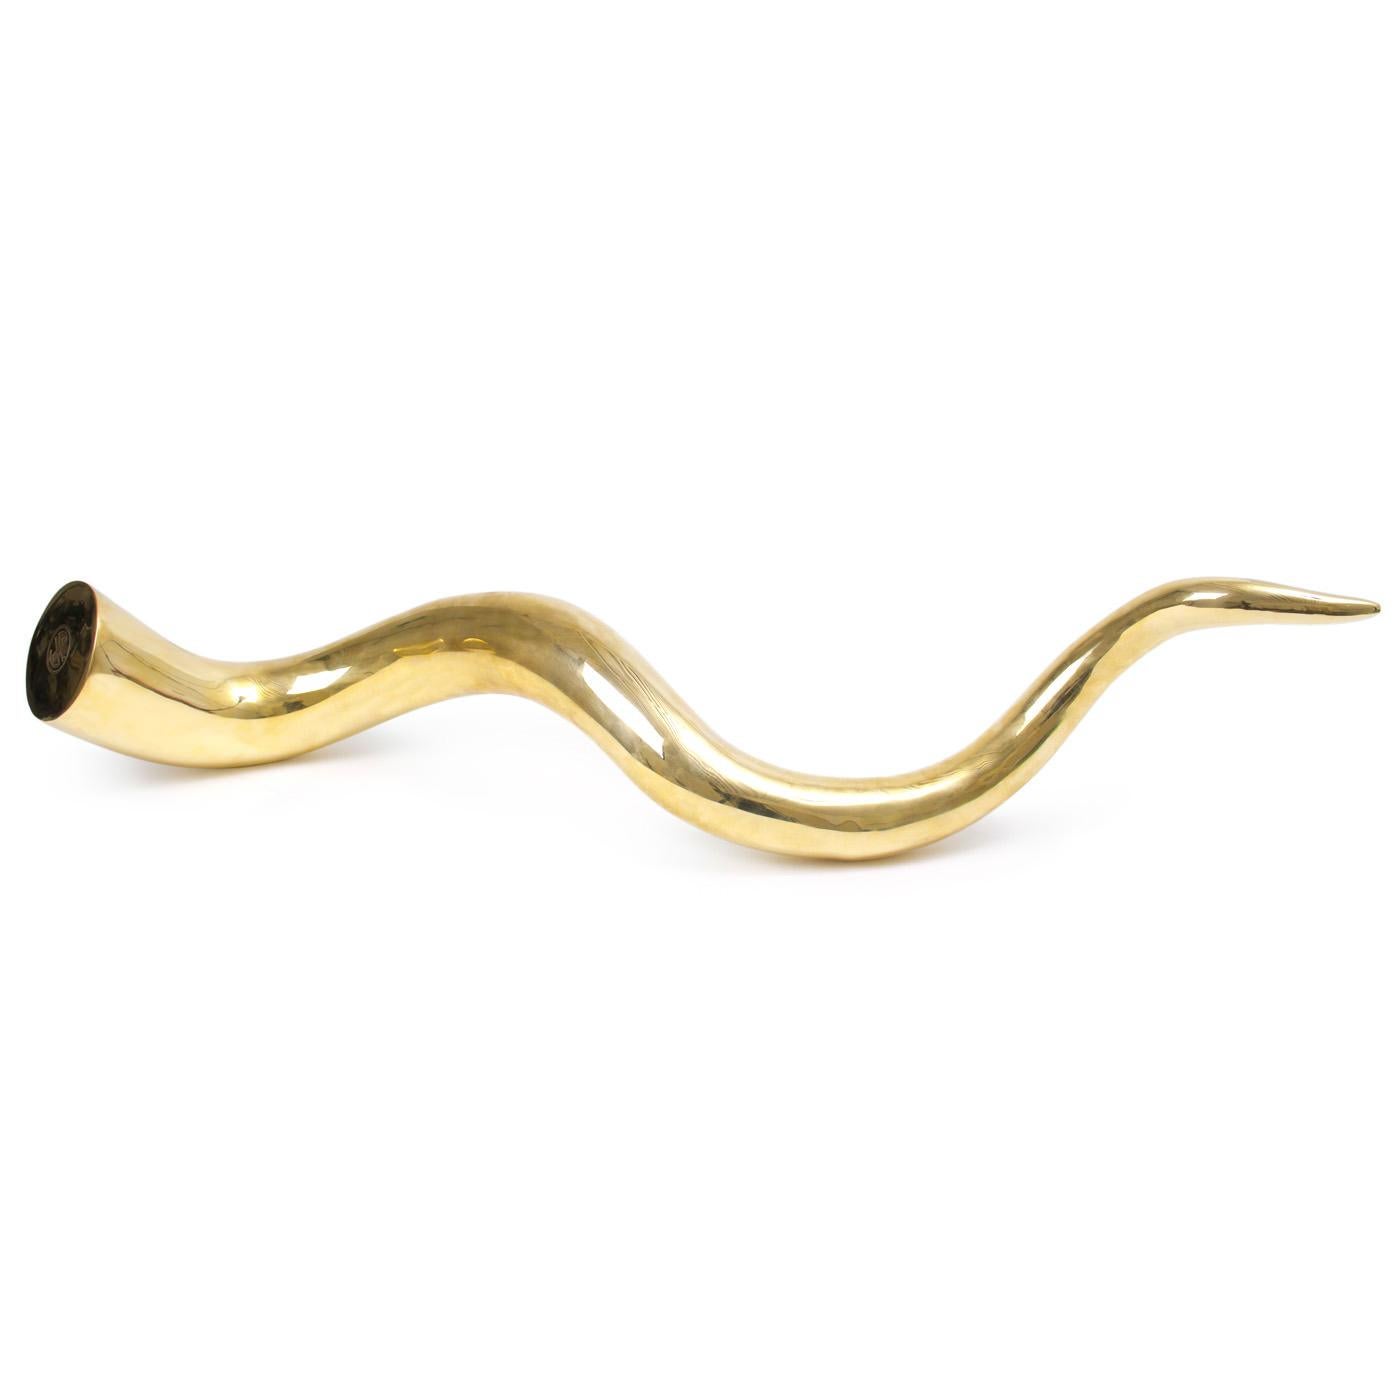 Trophy Piece. Add a heavy dose of handcrafted gravitas and Park Avenue luxury to your home with our Giant Brass Horn. Just the piece to make a statement in an entryway or on a console in a posh living room.

Each piece in our collection of brass